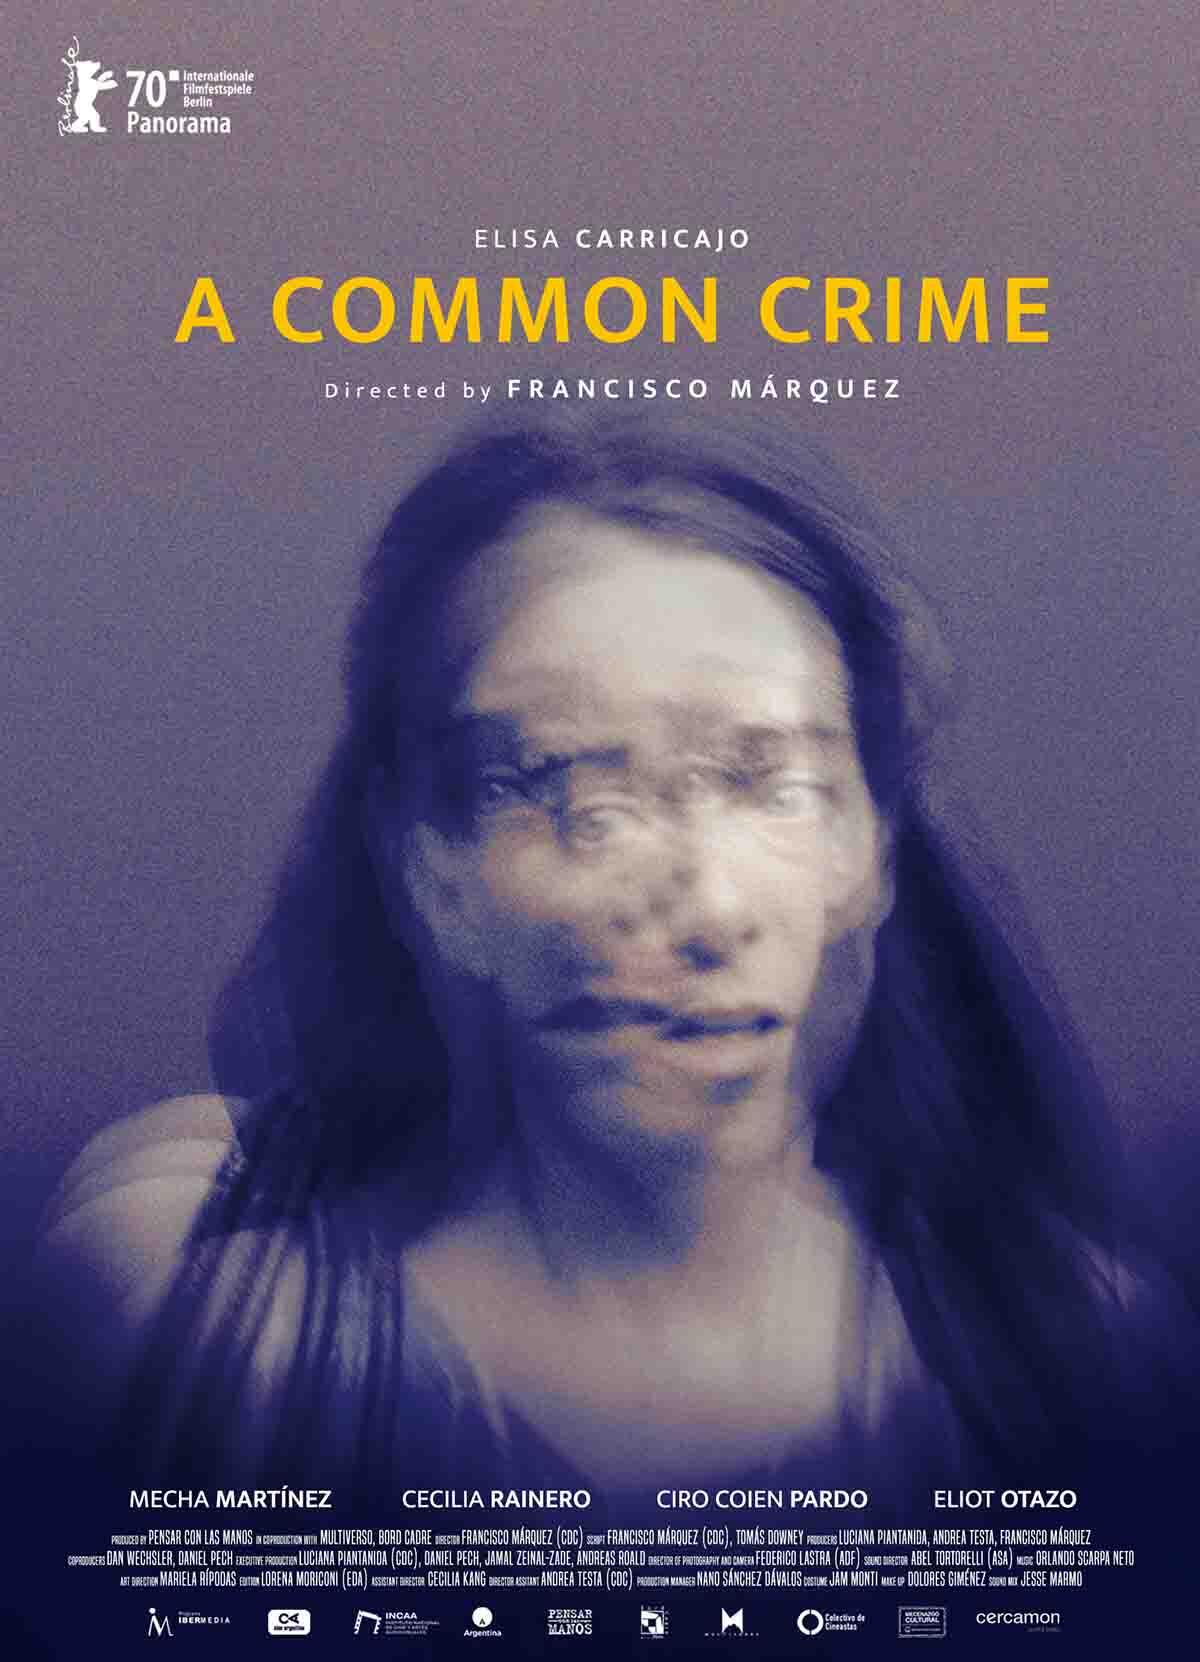 a common crime movie poster with a woman screaming